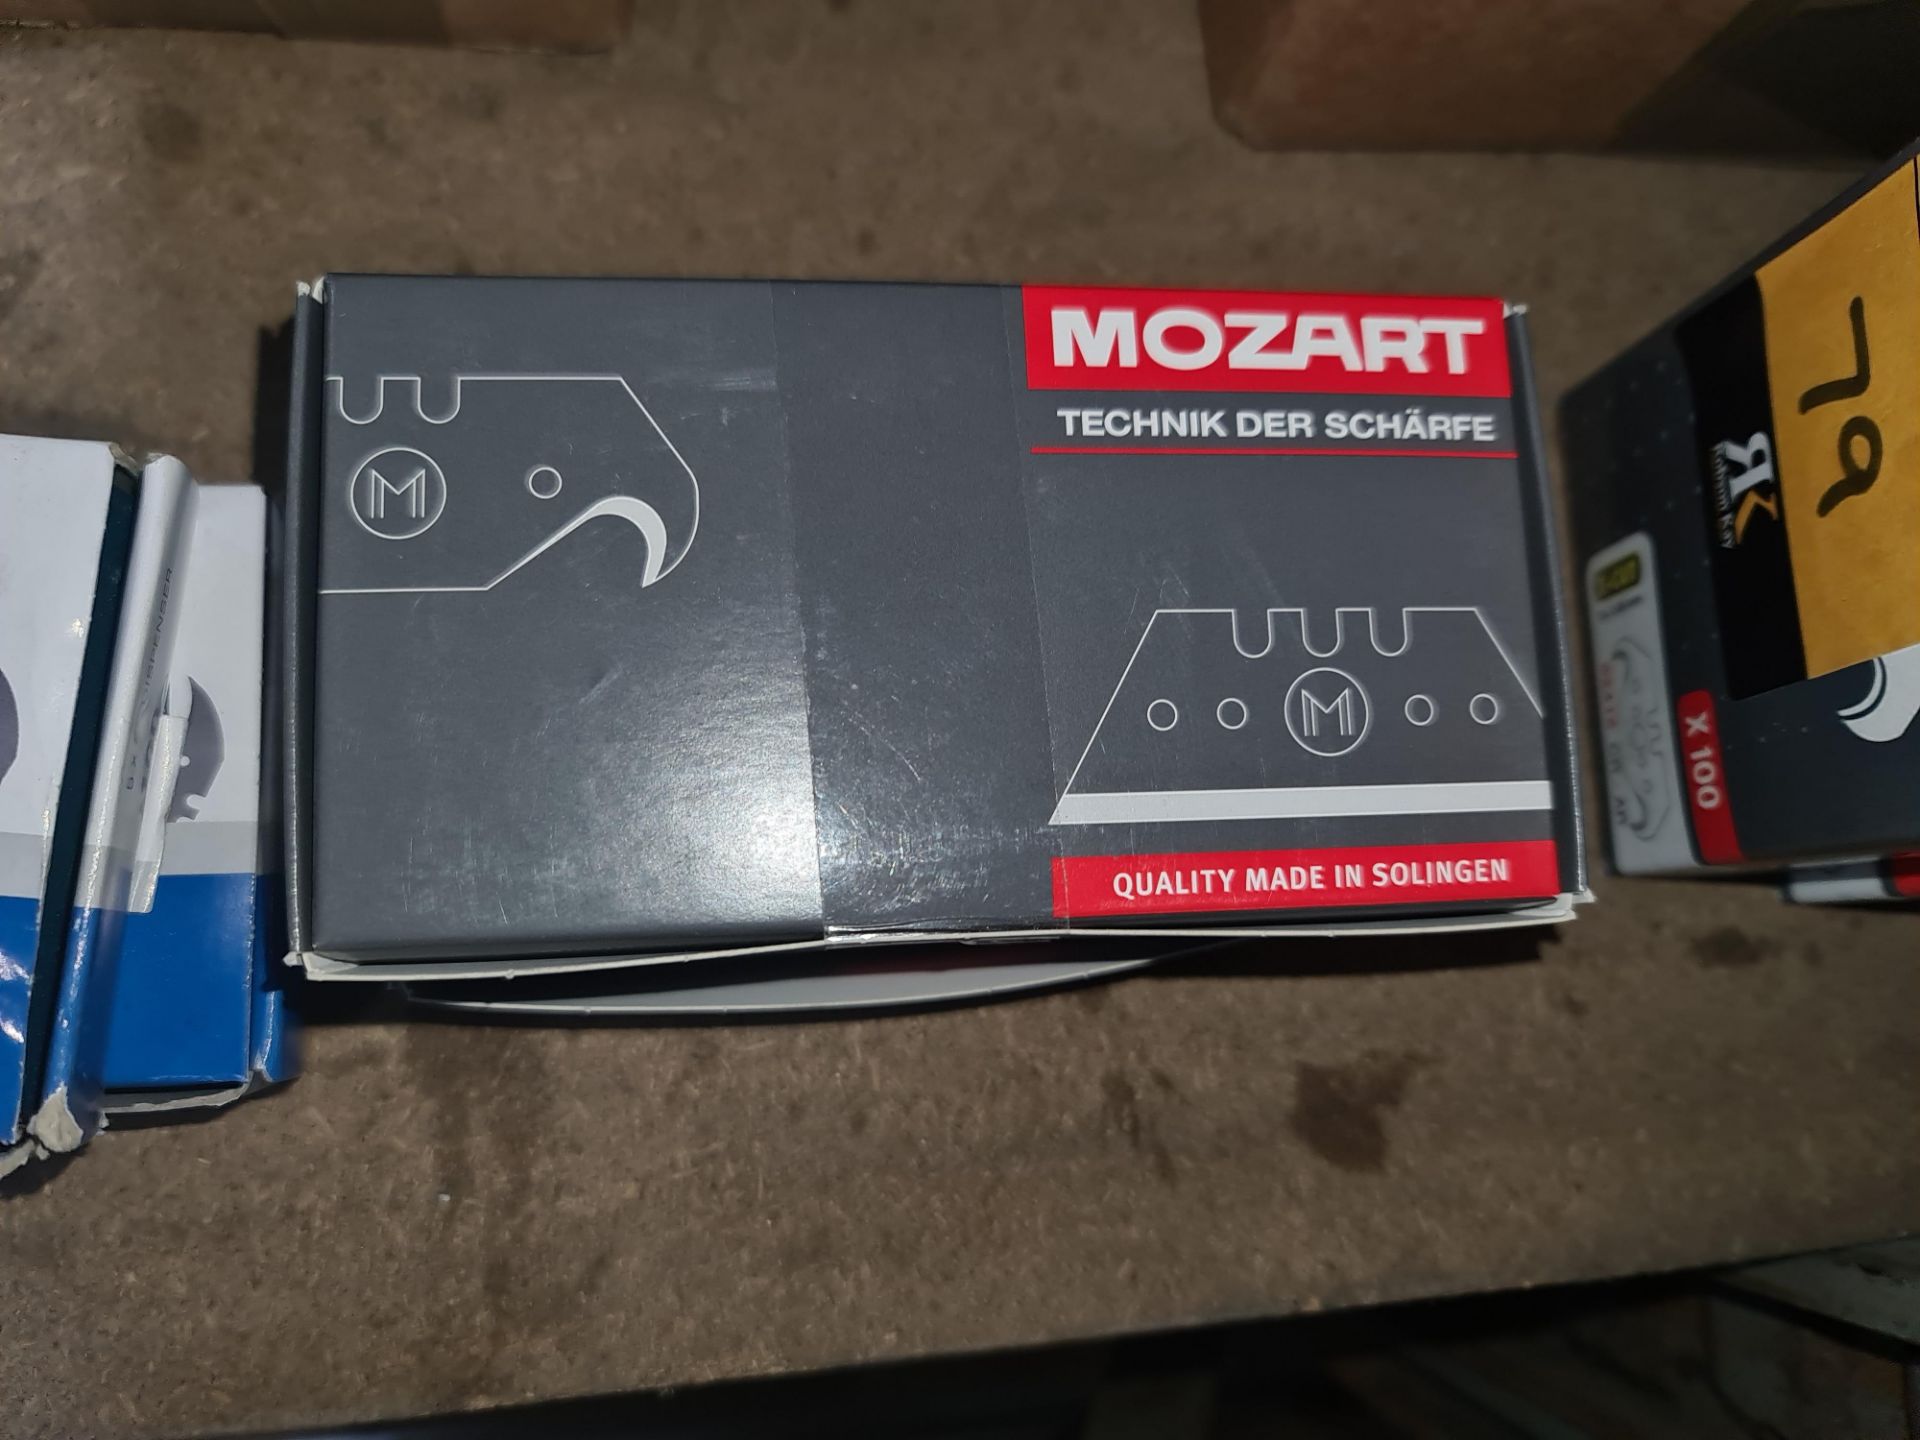 3 boxes of Mozart trimming knife bladesLots 31 - 328 comprise the total assets of a flooring tool - Image 2 of 3